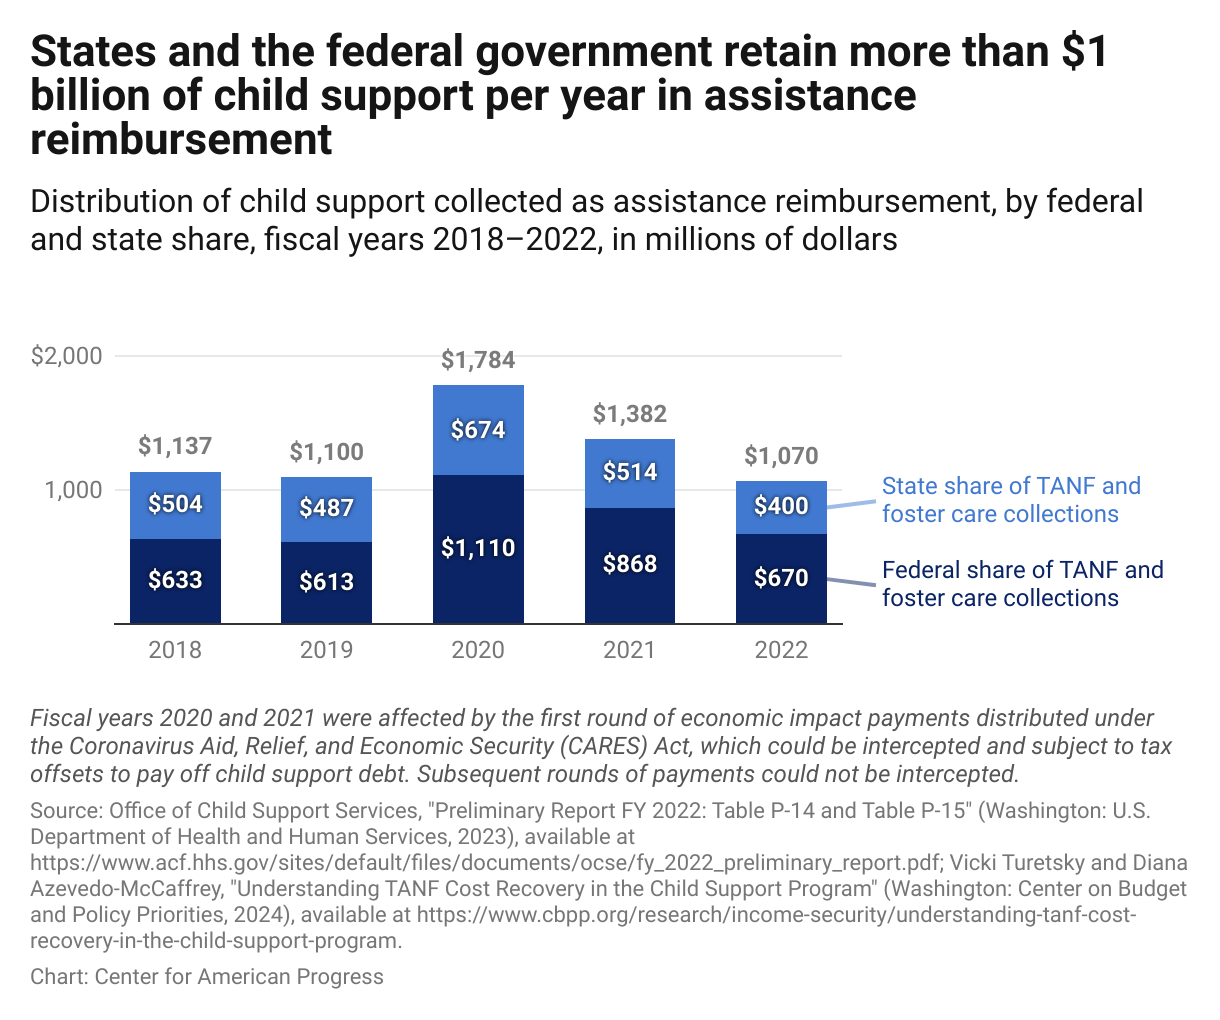 Stacked column chart of child support collected as assistance reimbursement for TANF and foster care services from FY 2018 to FY 2022, showing that states and the federal government keep more than $1 billion in child support collections per year. 